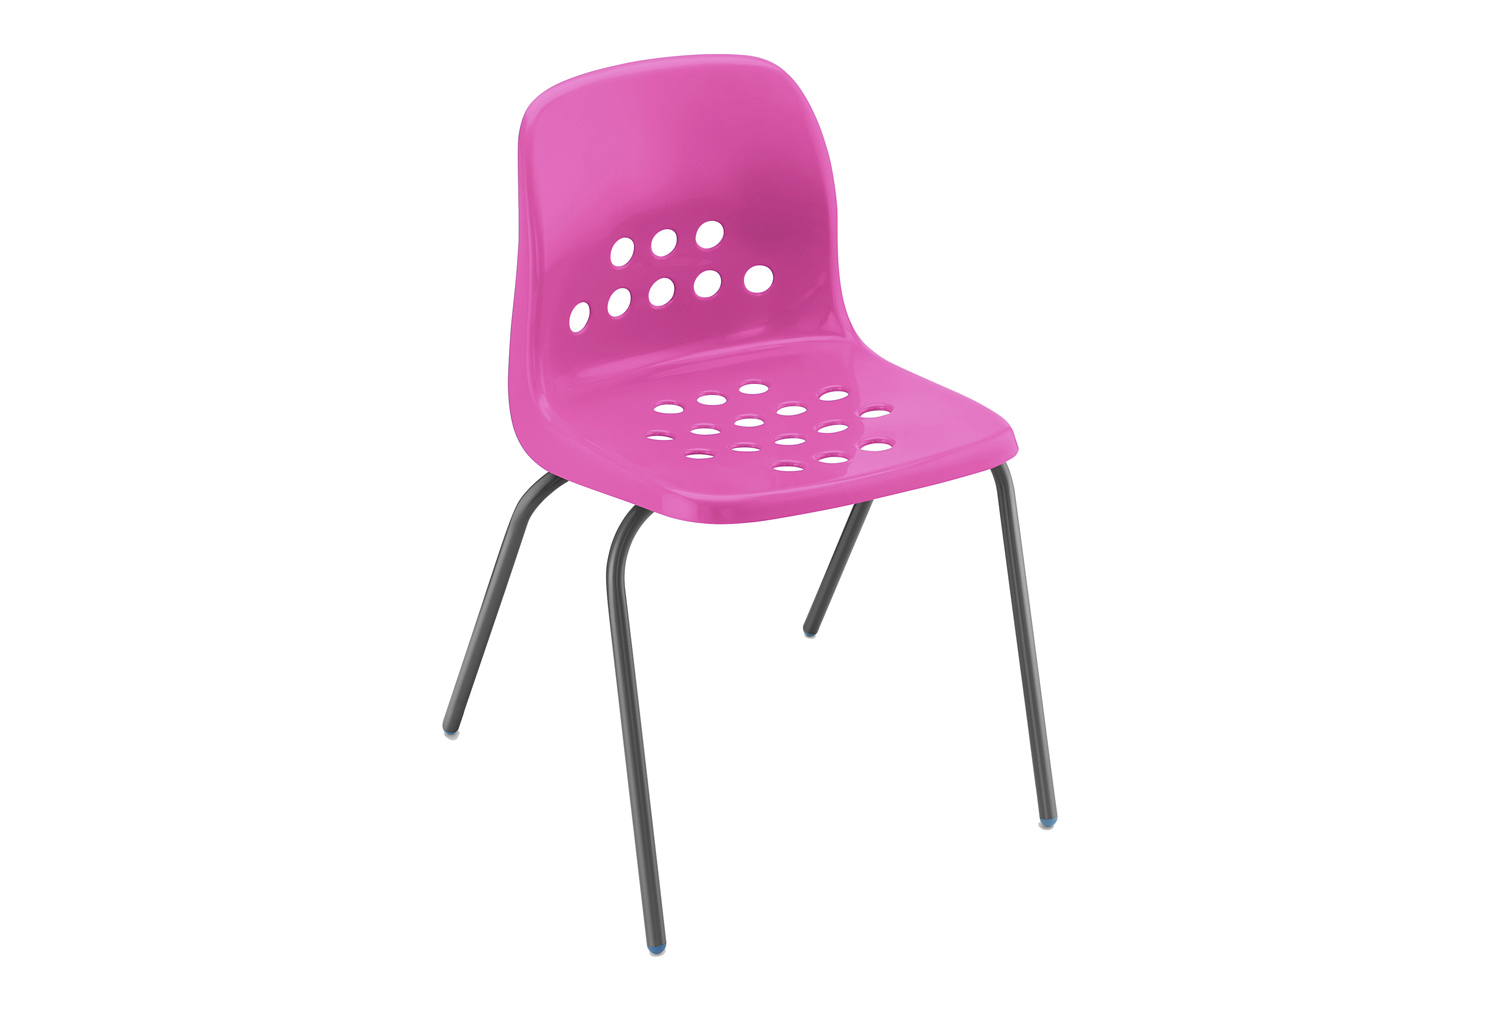 Qty 8 - Hille Pepperpot Classroom Chair, 14+ Years - 40wx41dx46h (cm), Black Frame, Pink